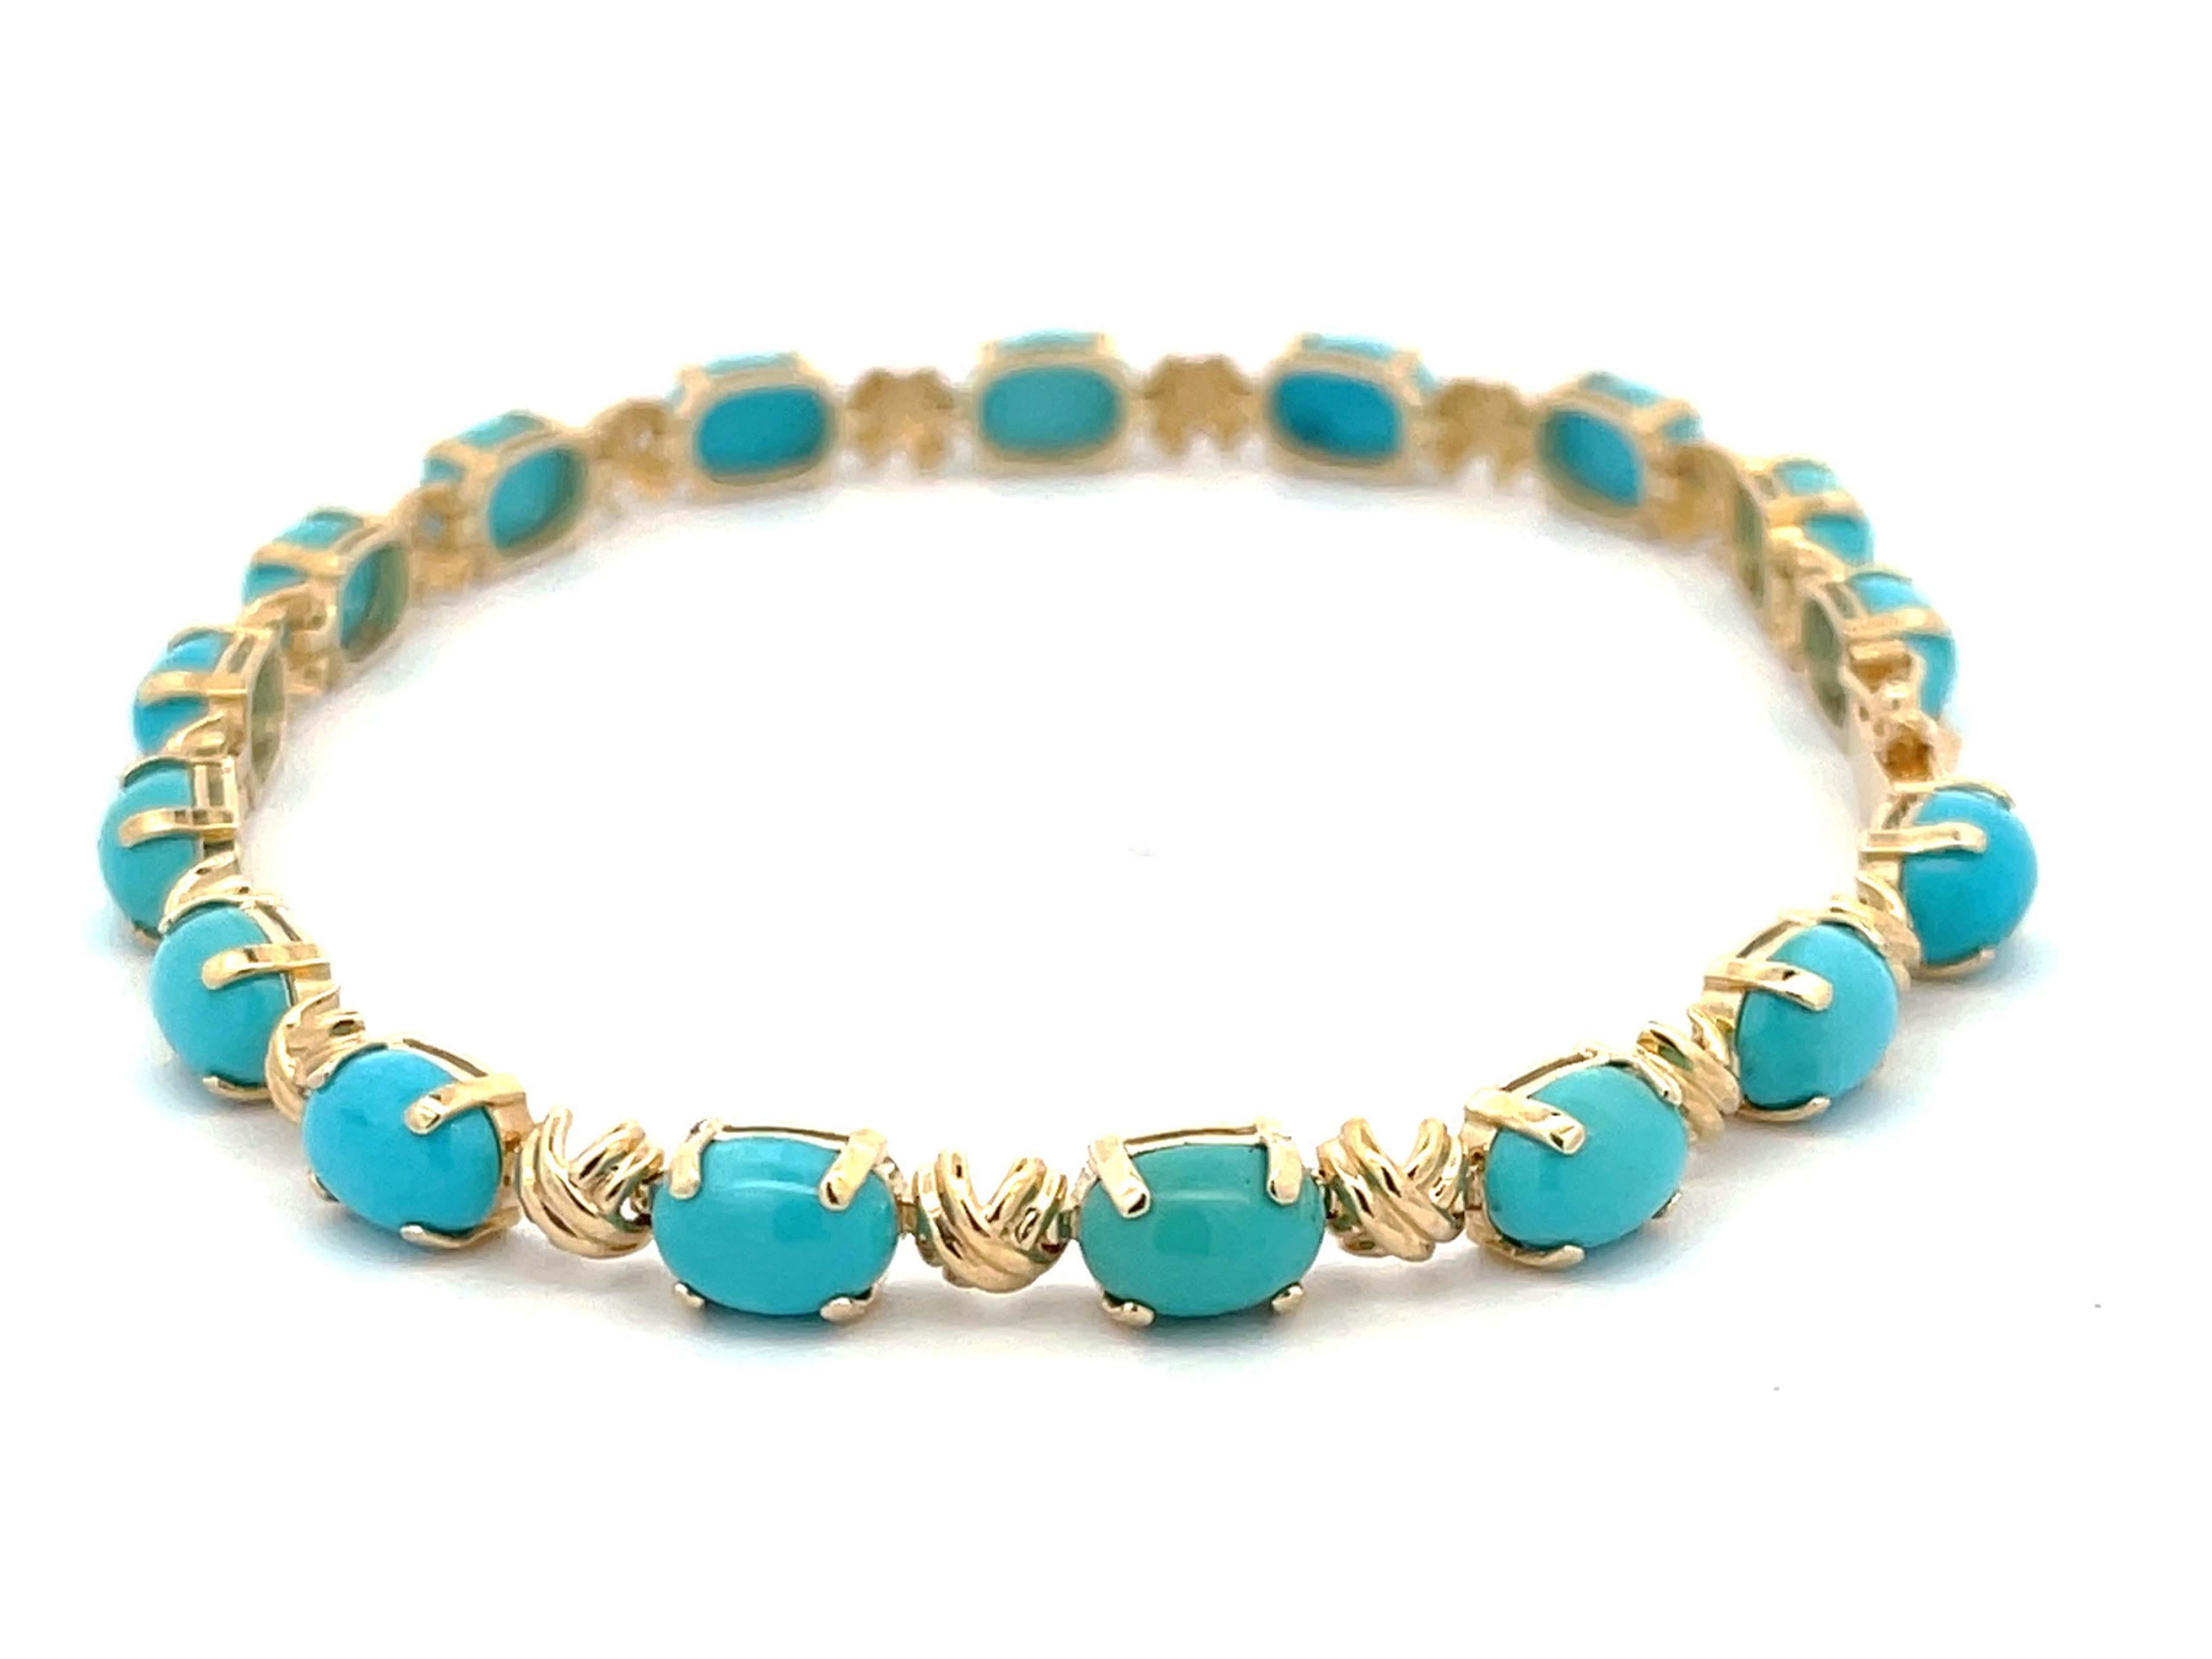 Turquoise Bracelet in 14k Yellow Gold In Excellent Condition For Sale In Honolulu, HI